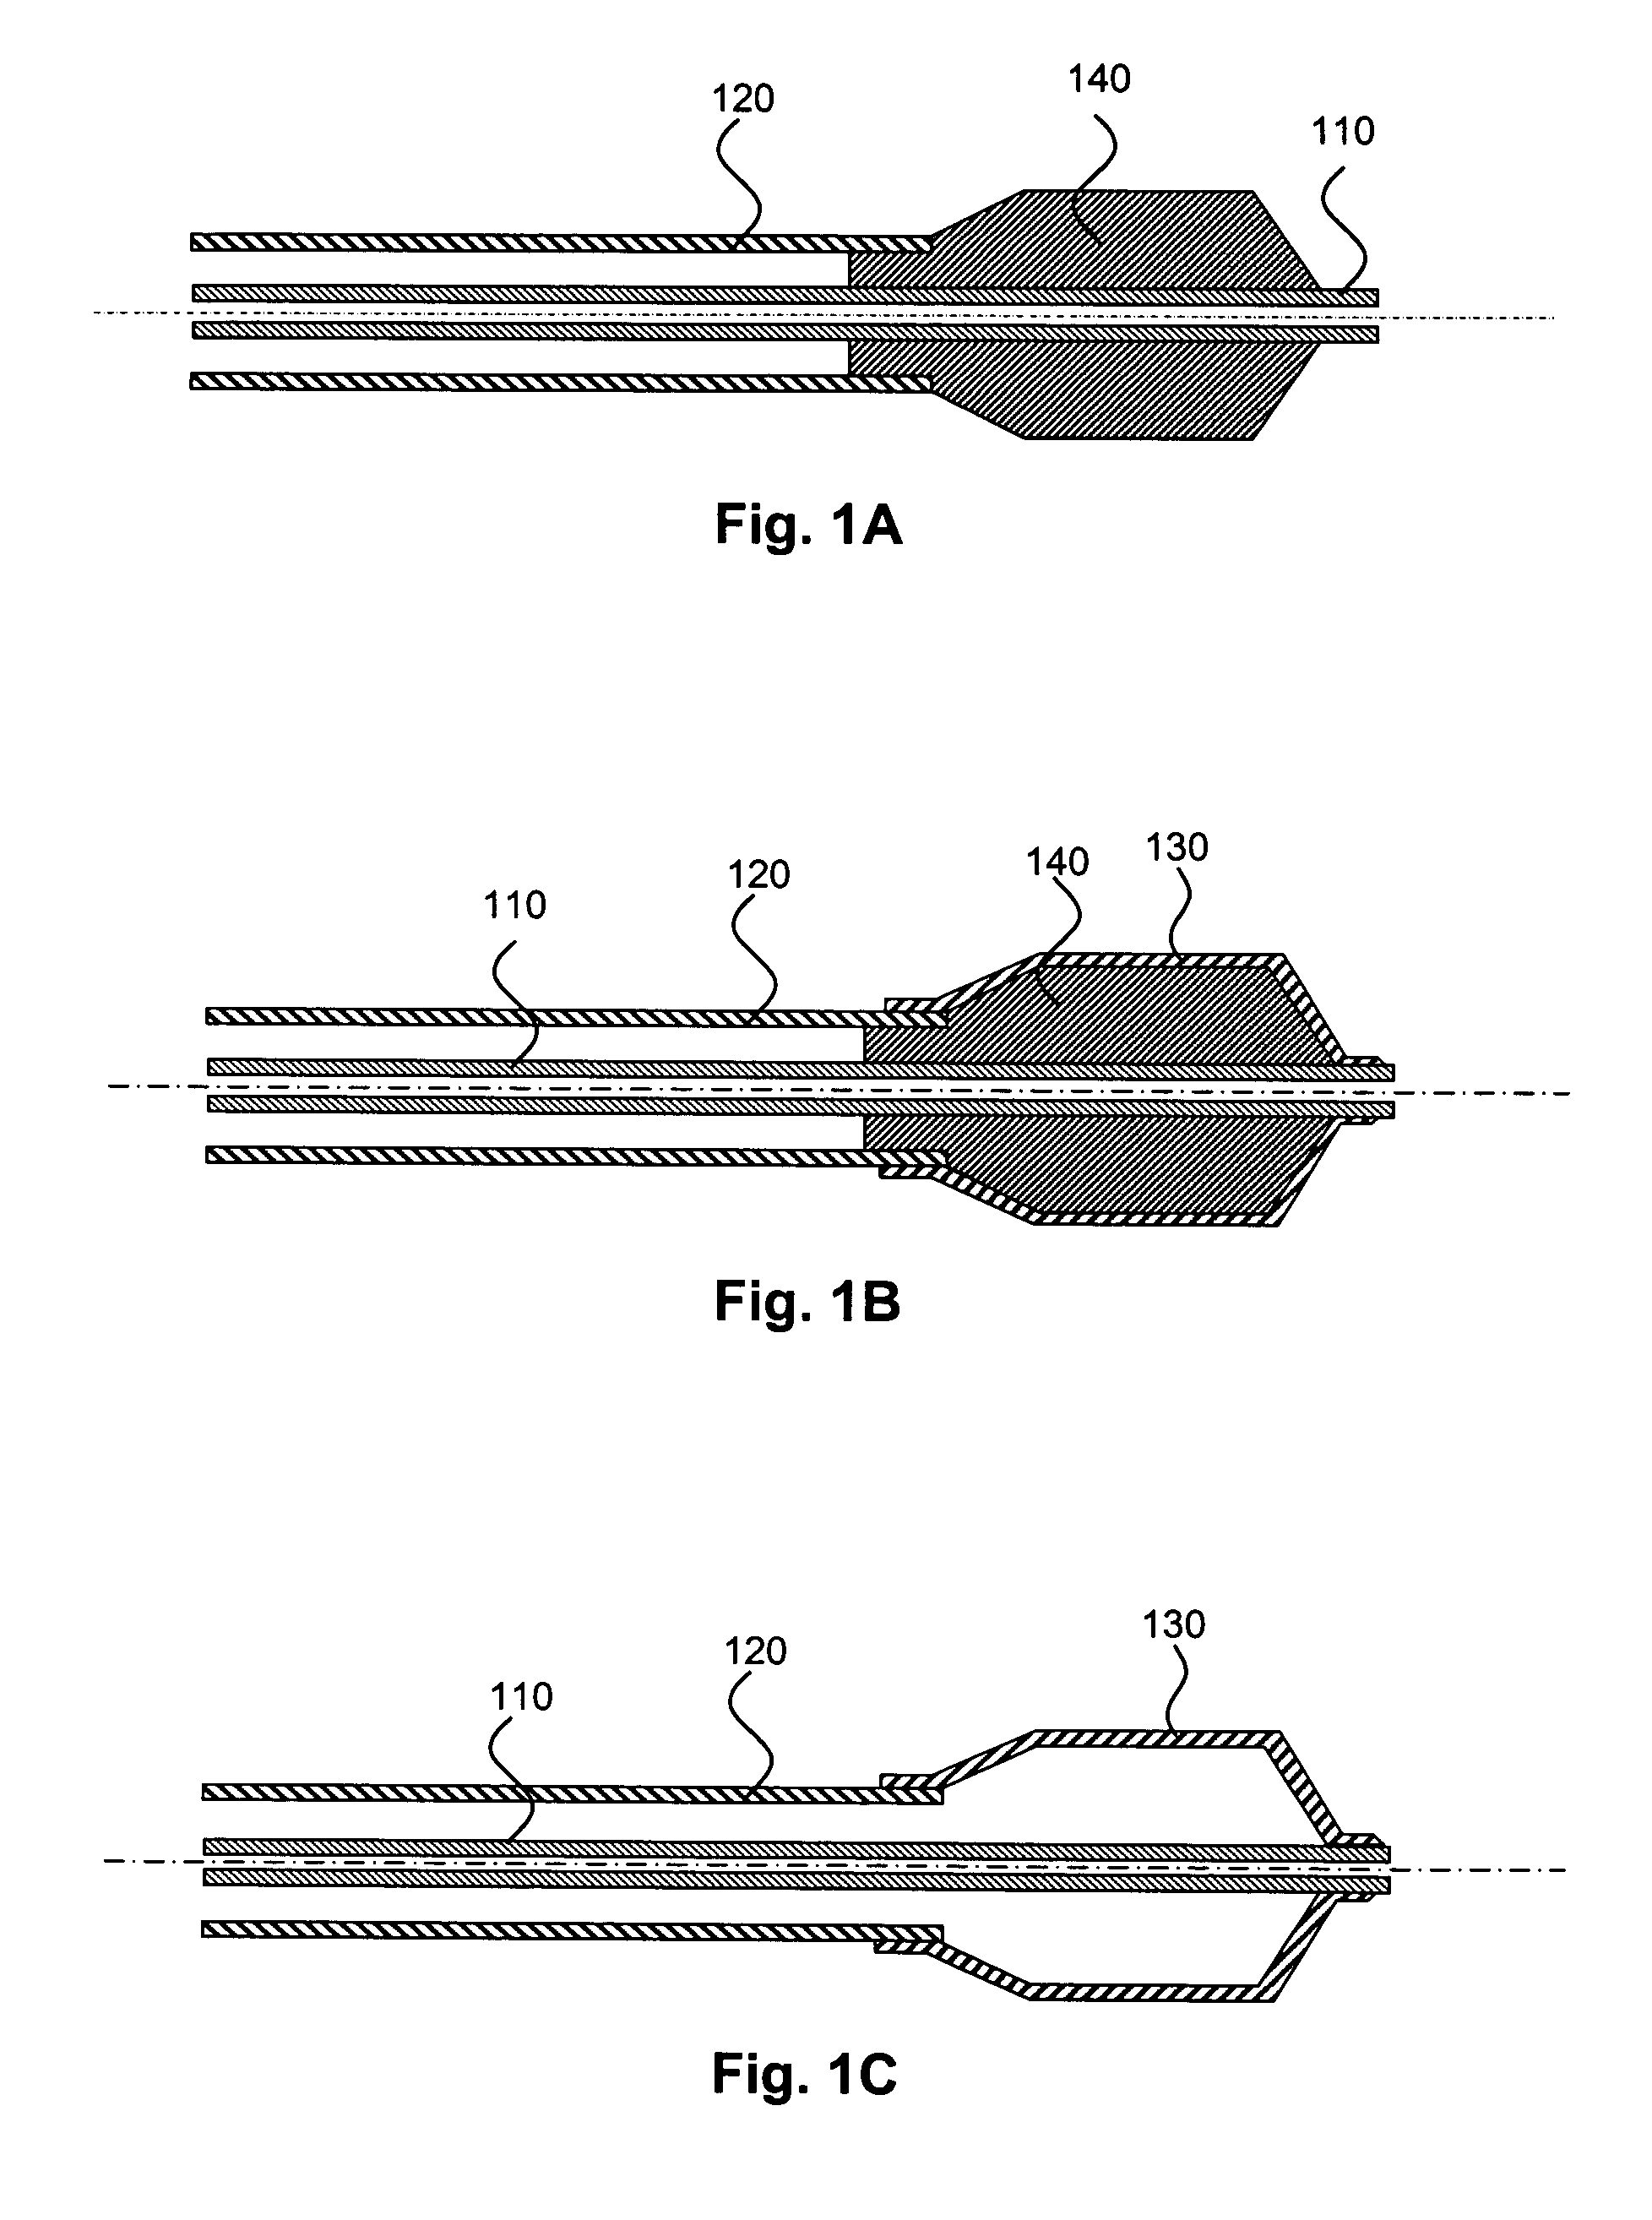 Medical devices having multiple layers